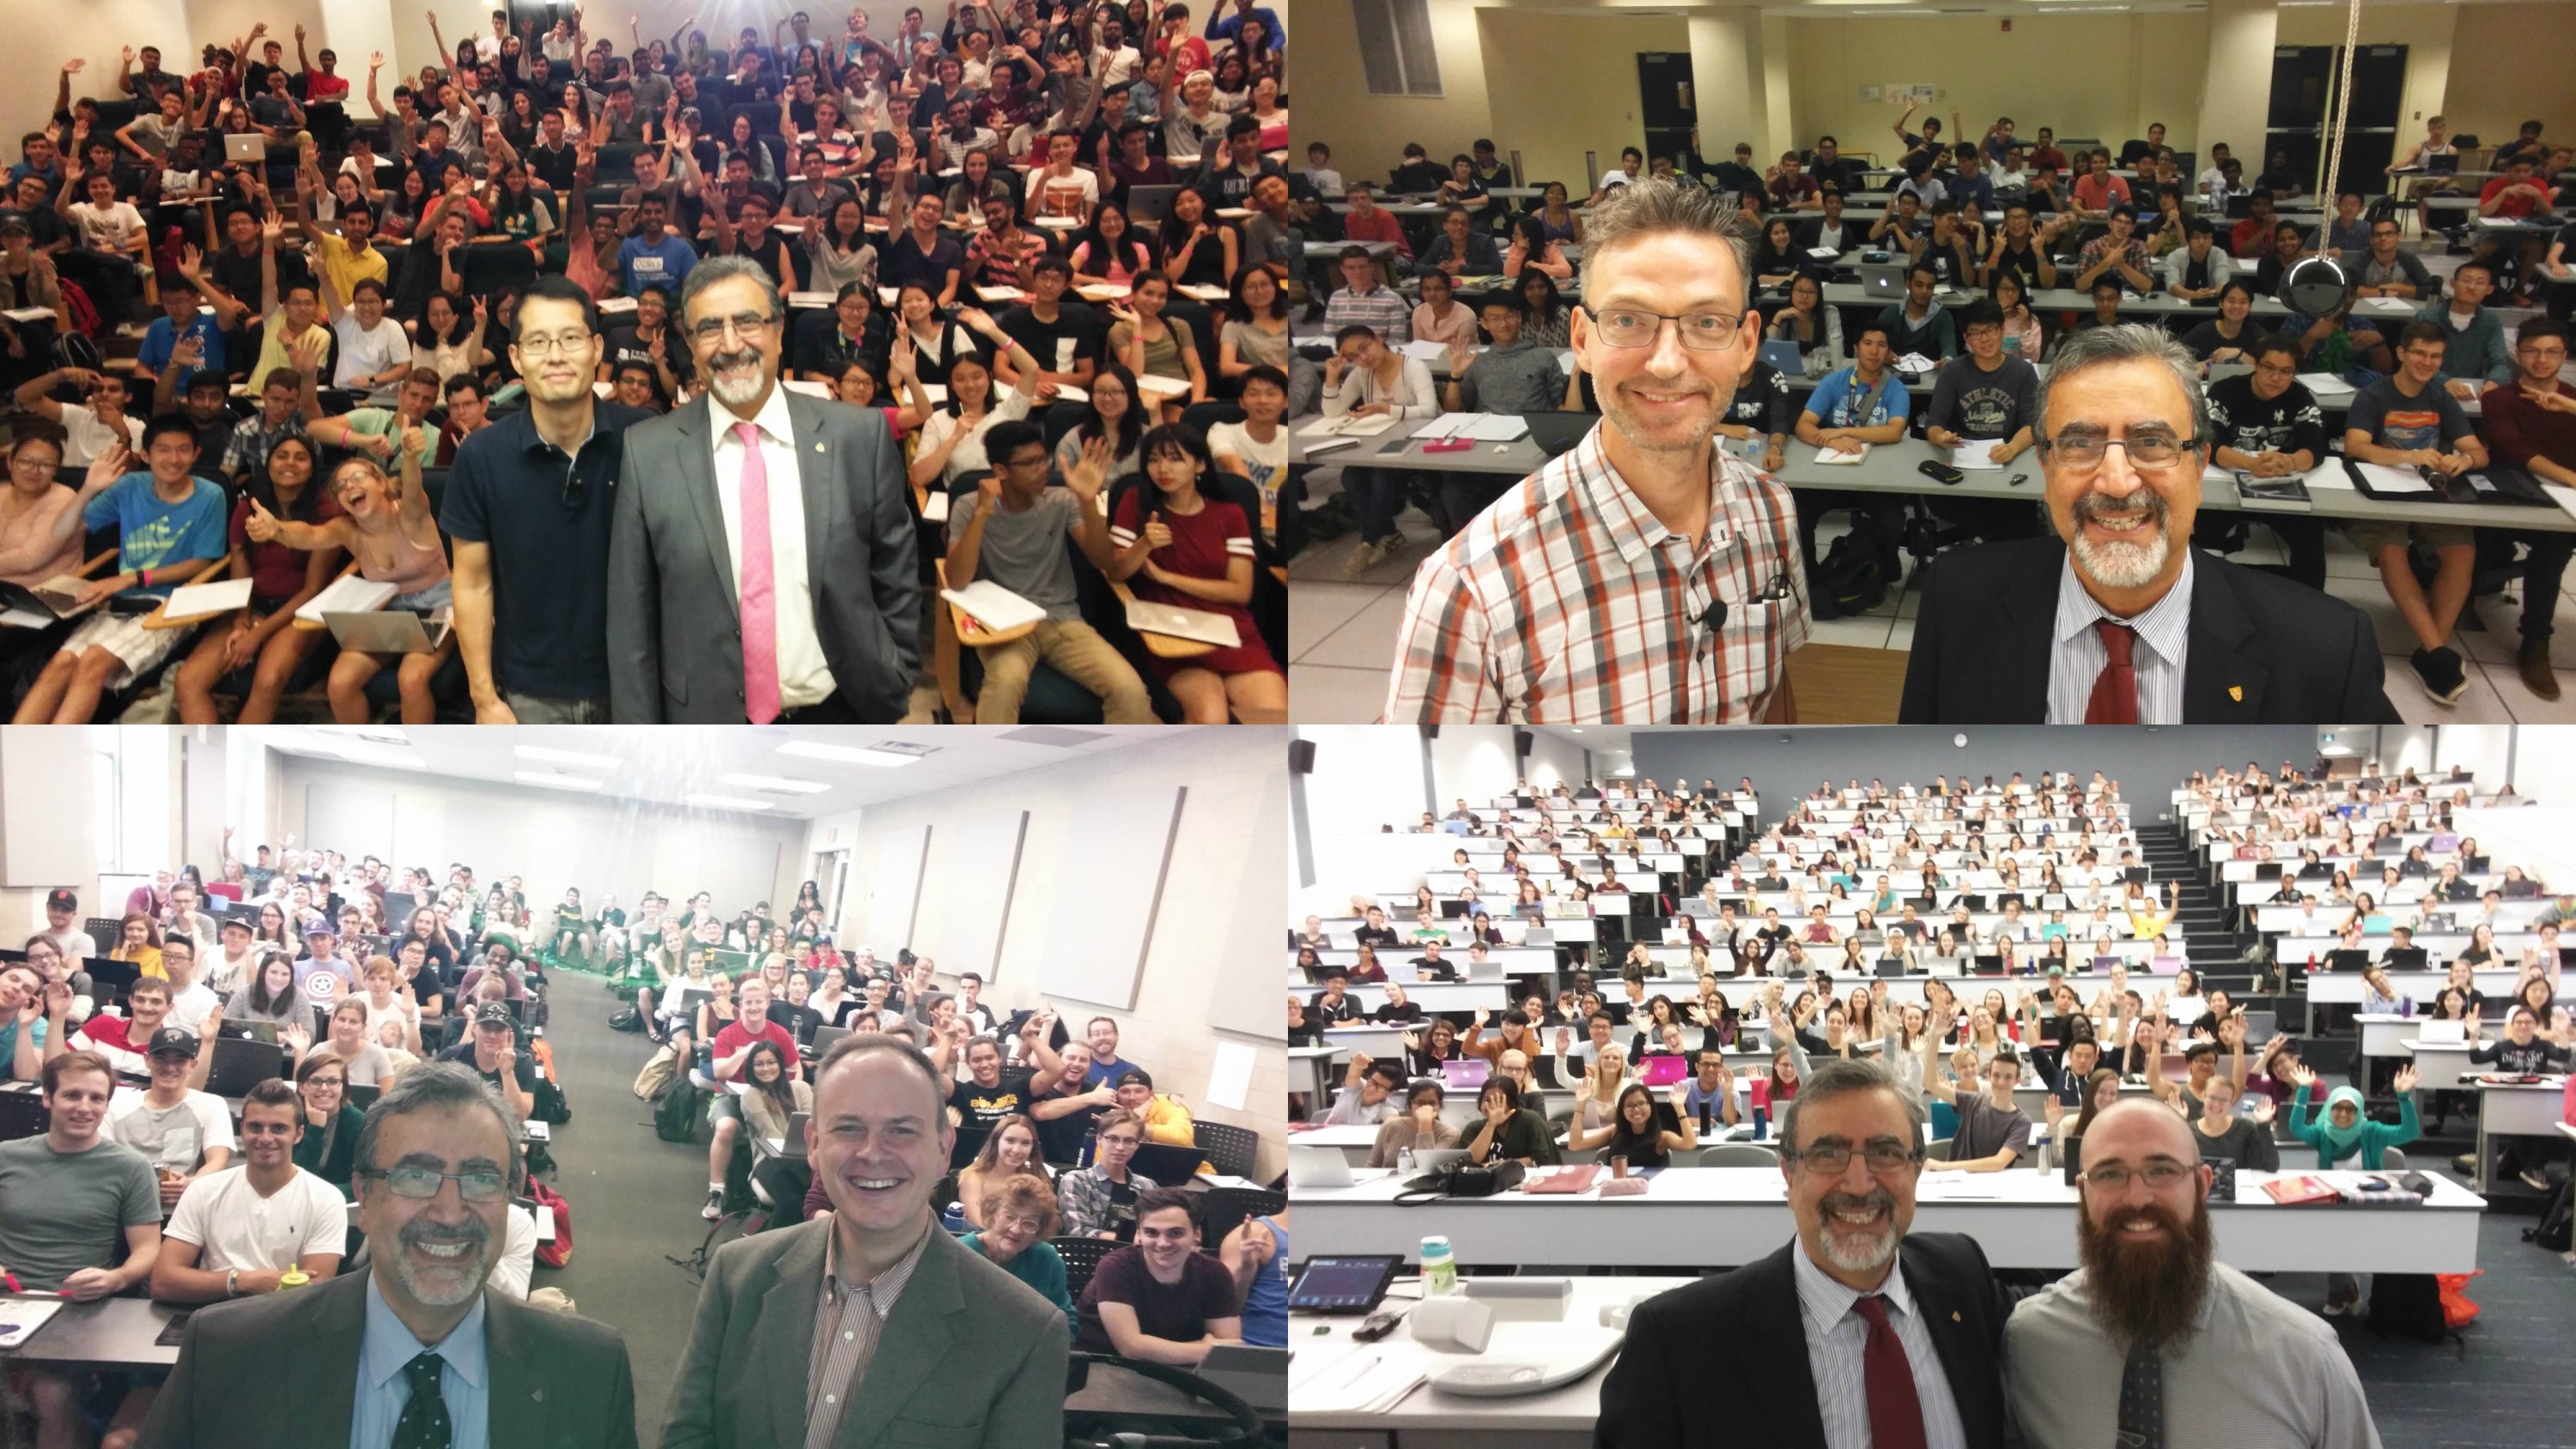 Collage of 4 selfies featuring President Feridun Hamdullahpur and classrooms of students.